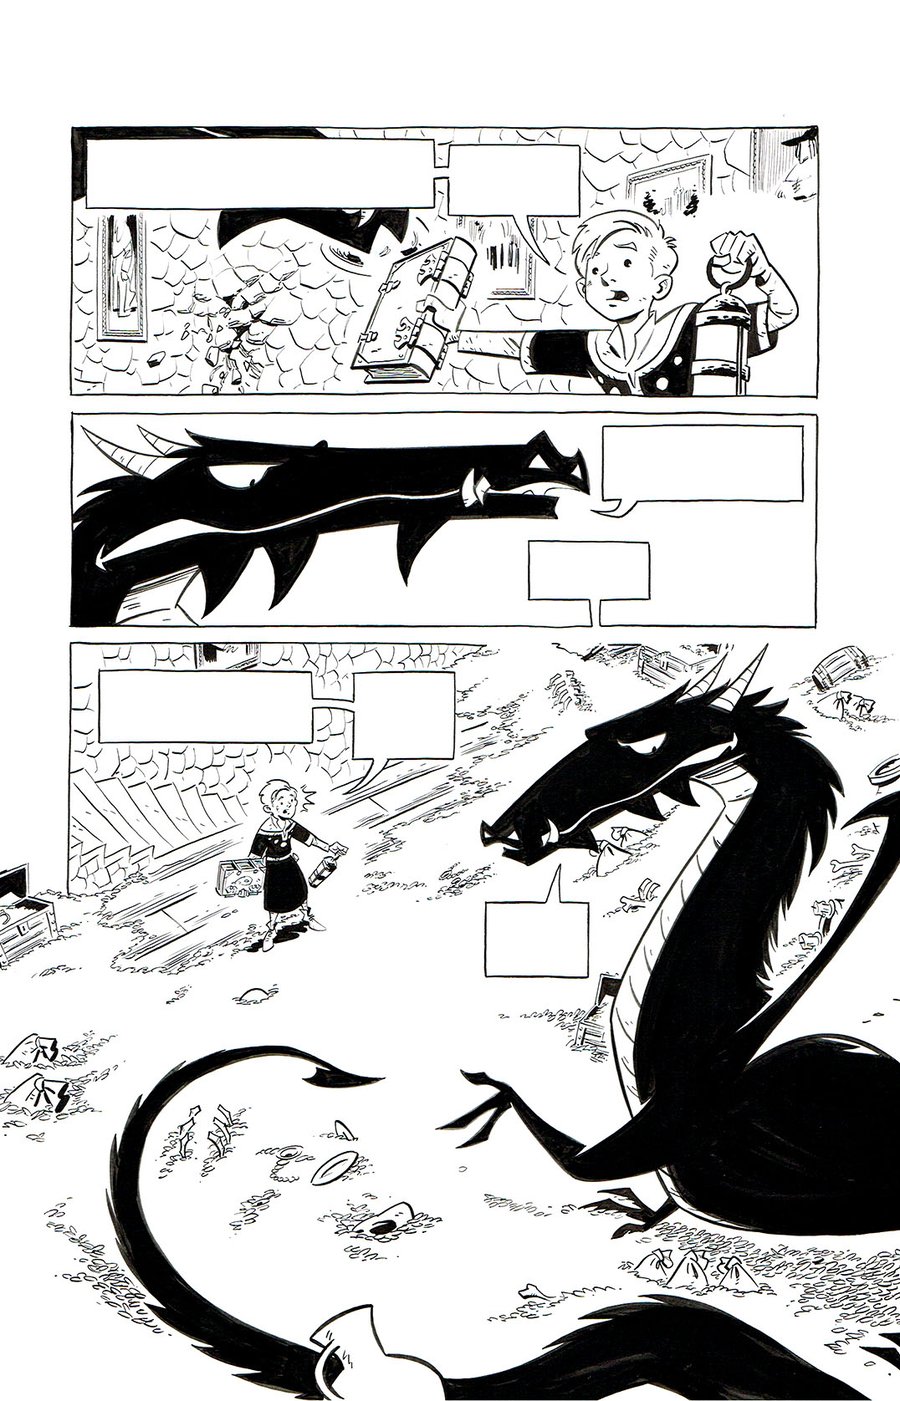 Image of SQUIRE & KNIGHT page 148 original art